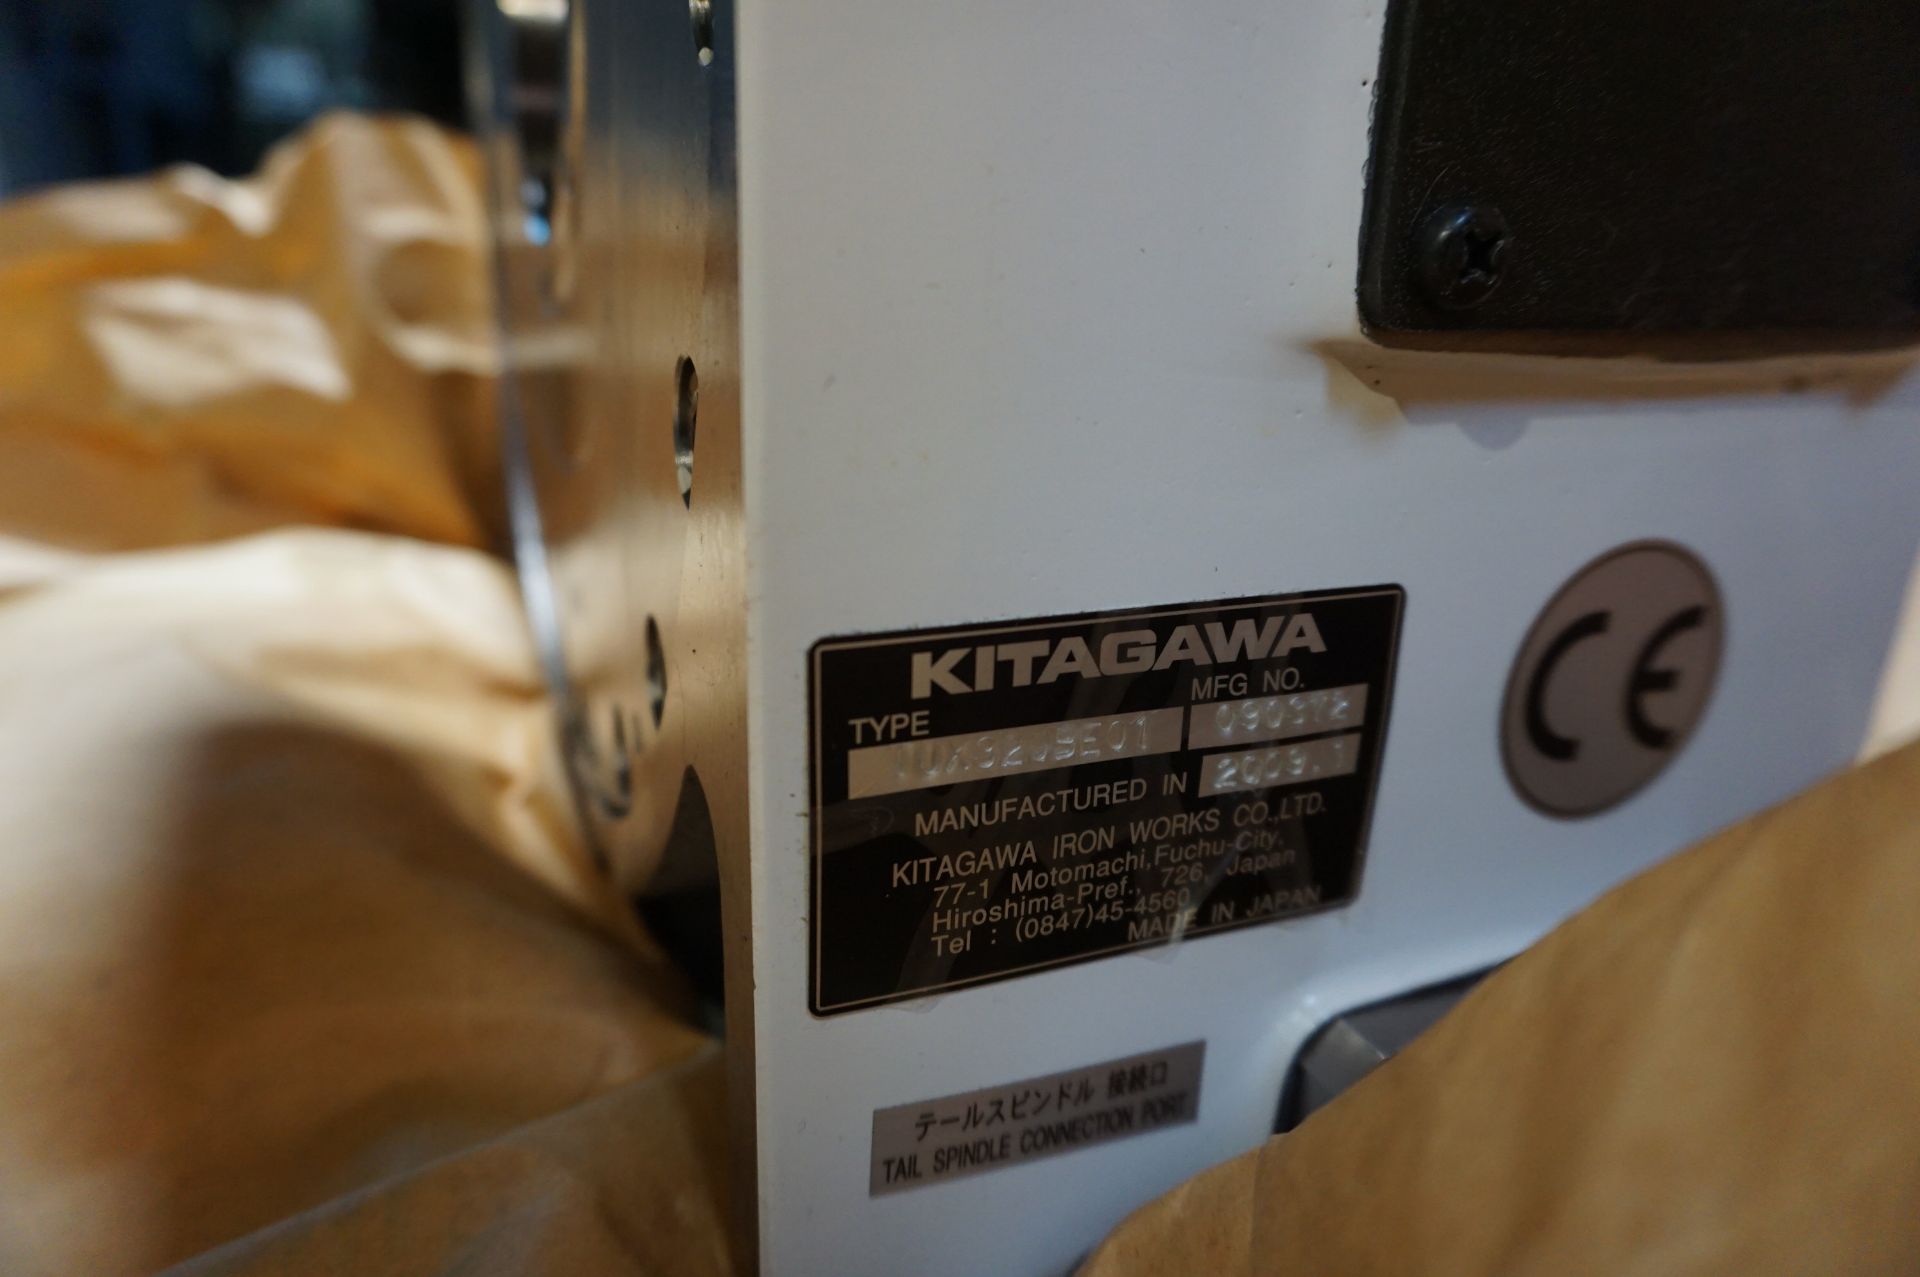 NEVER USED IN ORIGINAL BOX - 2009 KITIGAWA TUX320BE01 4TH AXIS ROTARY TABLE S/N 090372 - Image 6 of 8